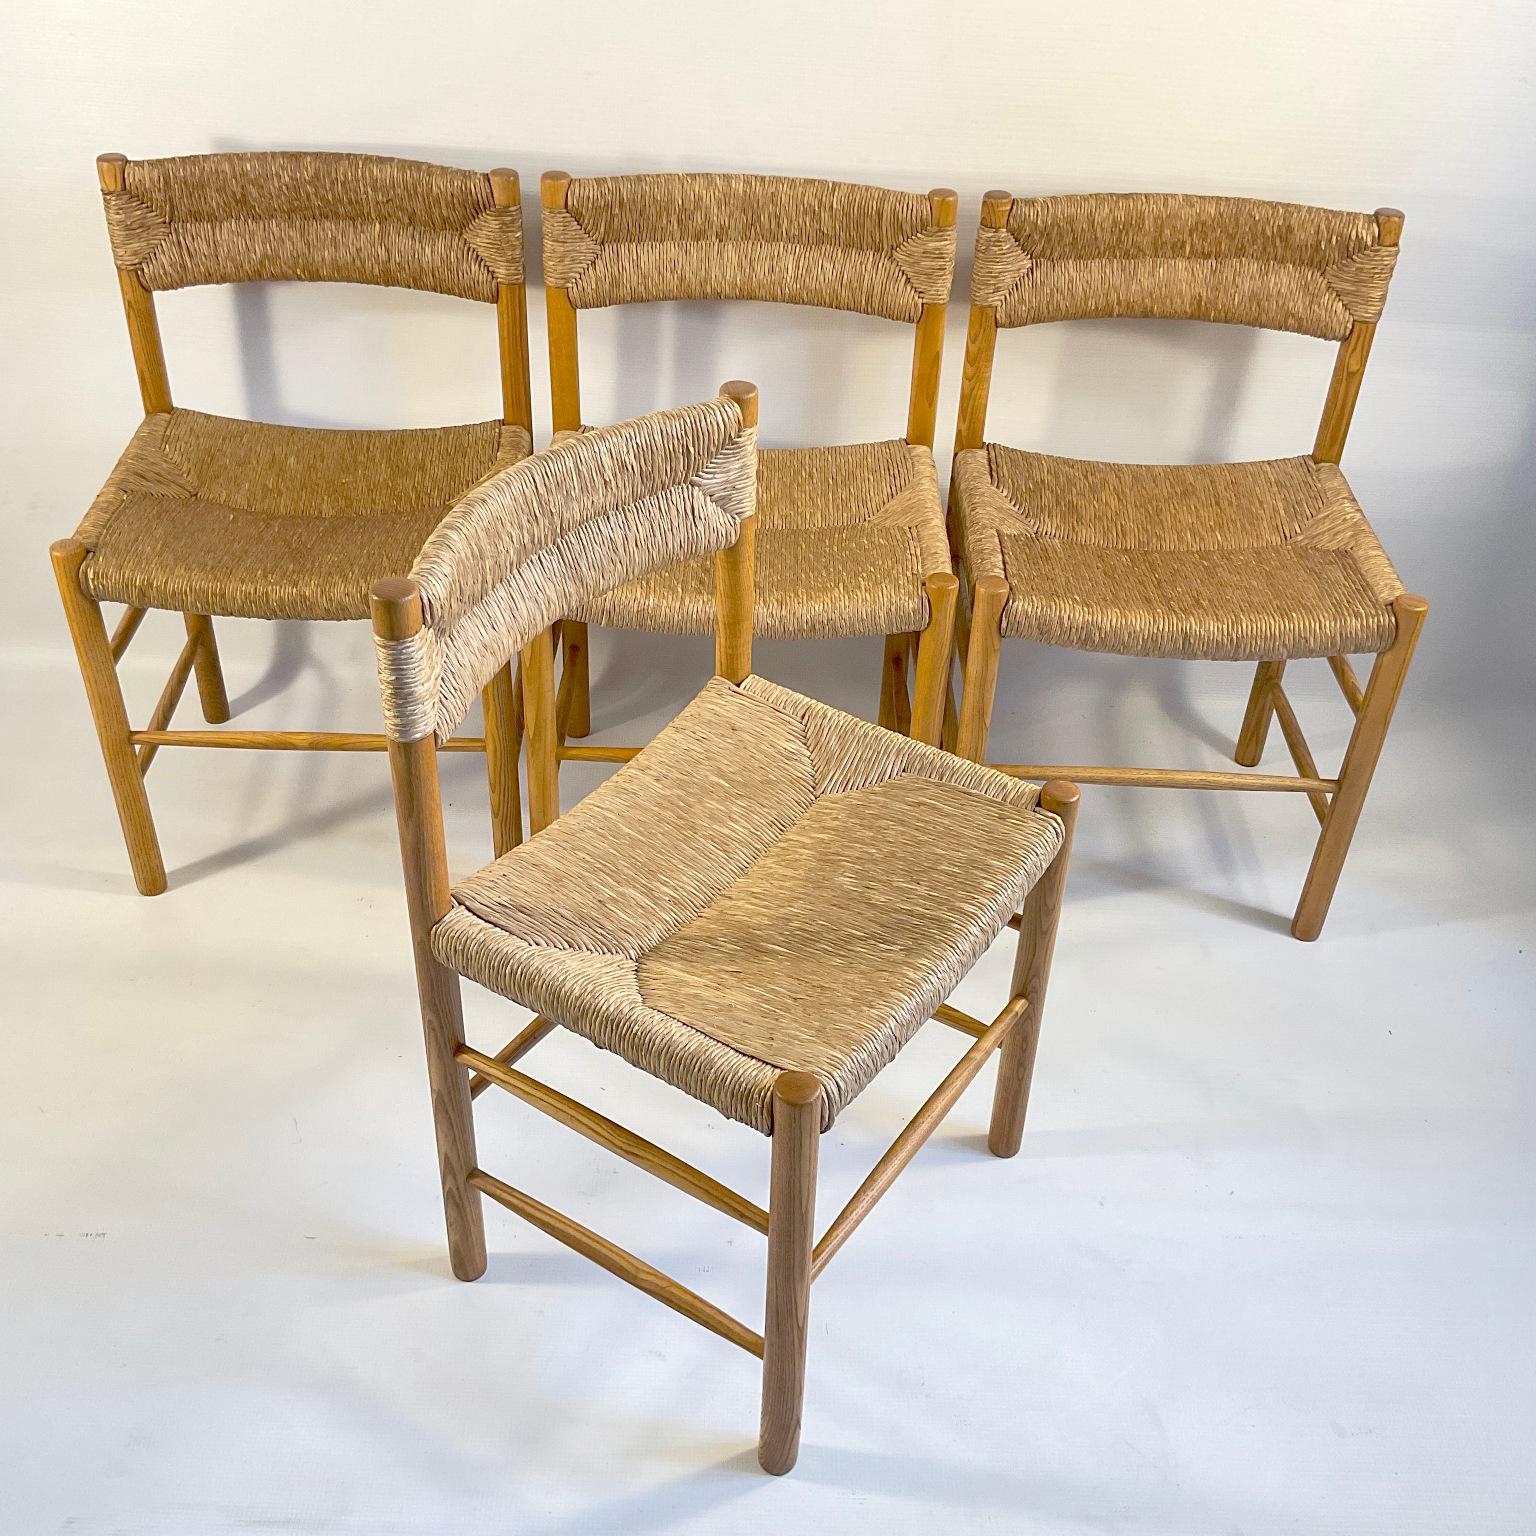 Set of Four Dordogne Chairs by Robert Sentou for Charlotte Perriand France 1960s For Sale 1